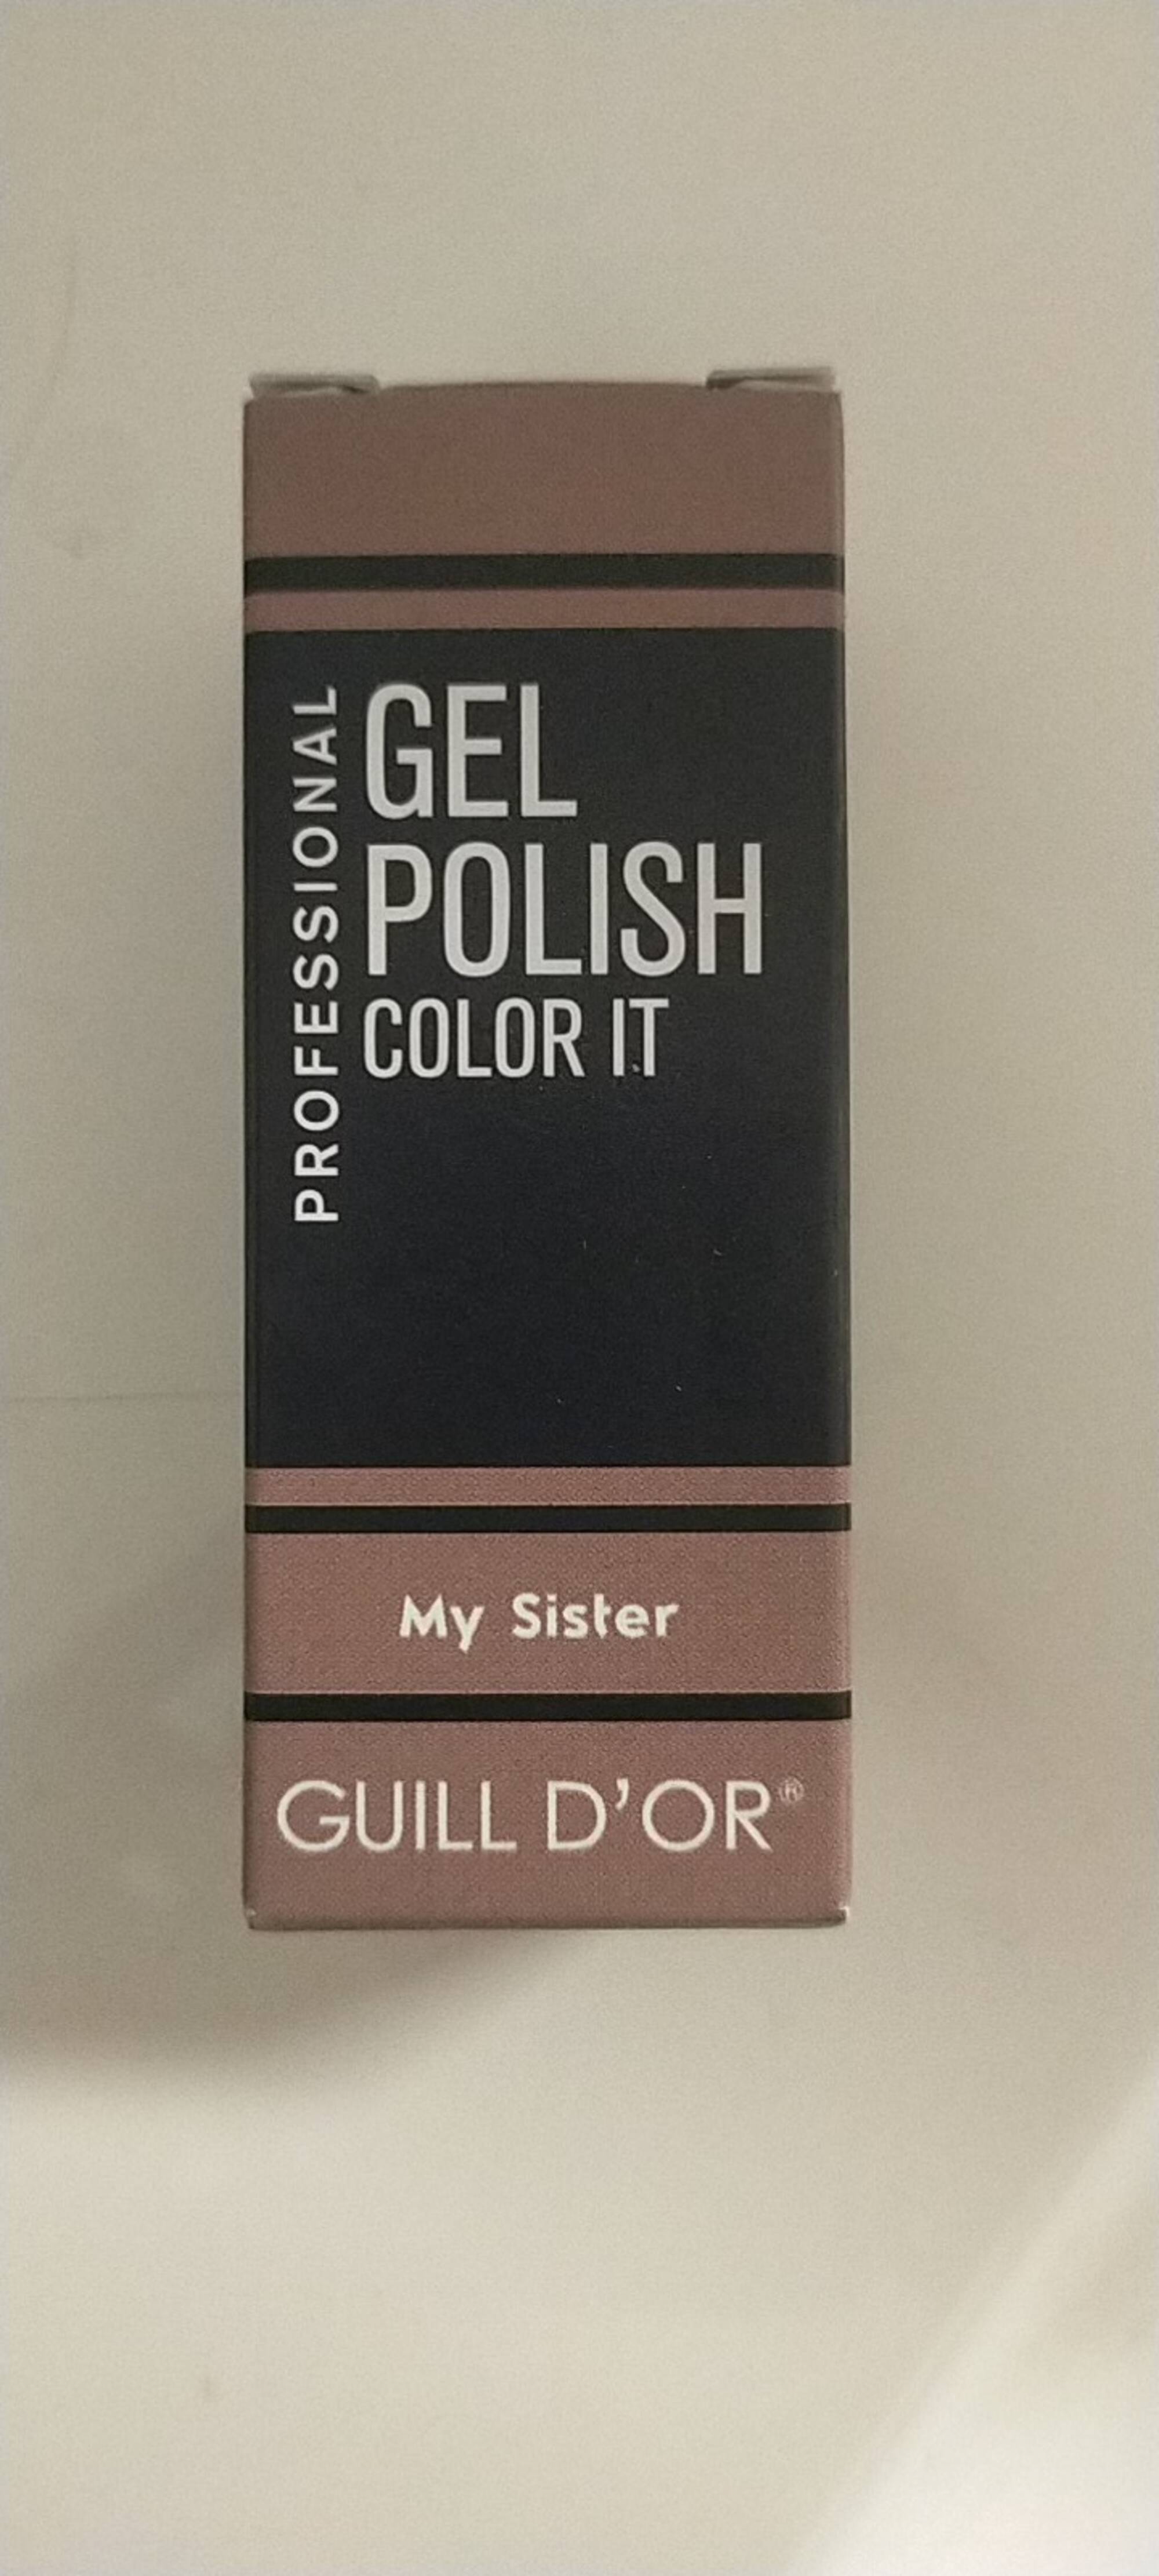 GUILL D'OR - Gel polish color it my sister